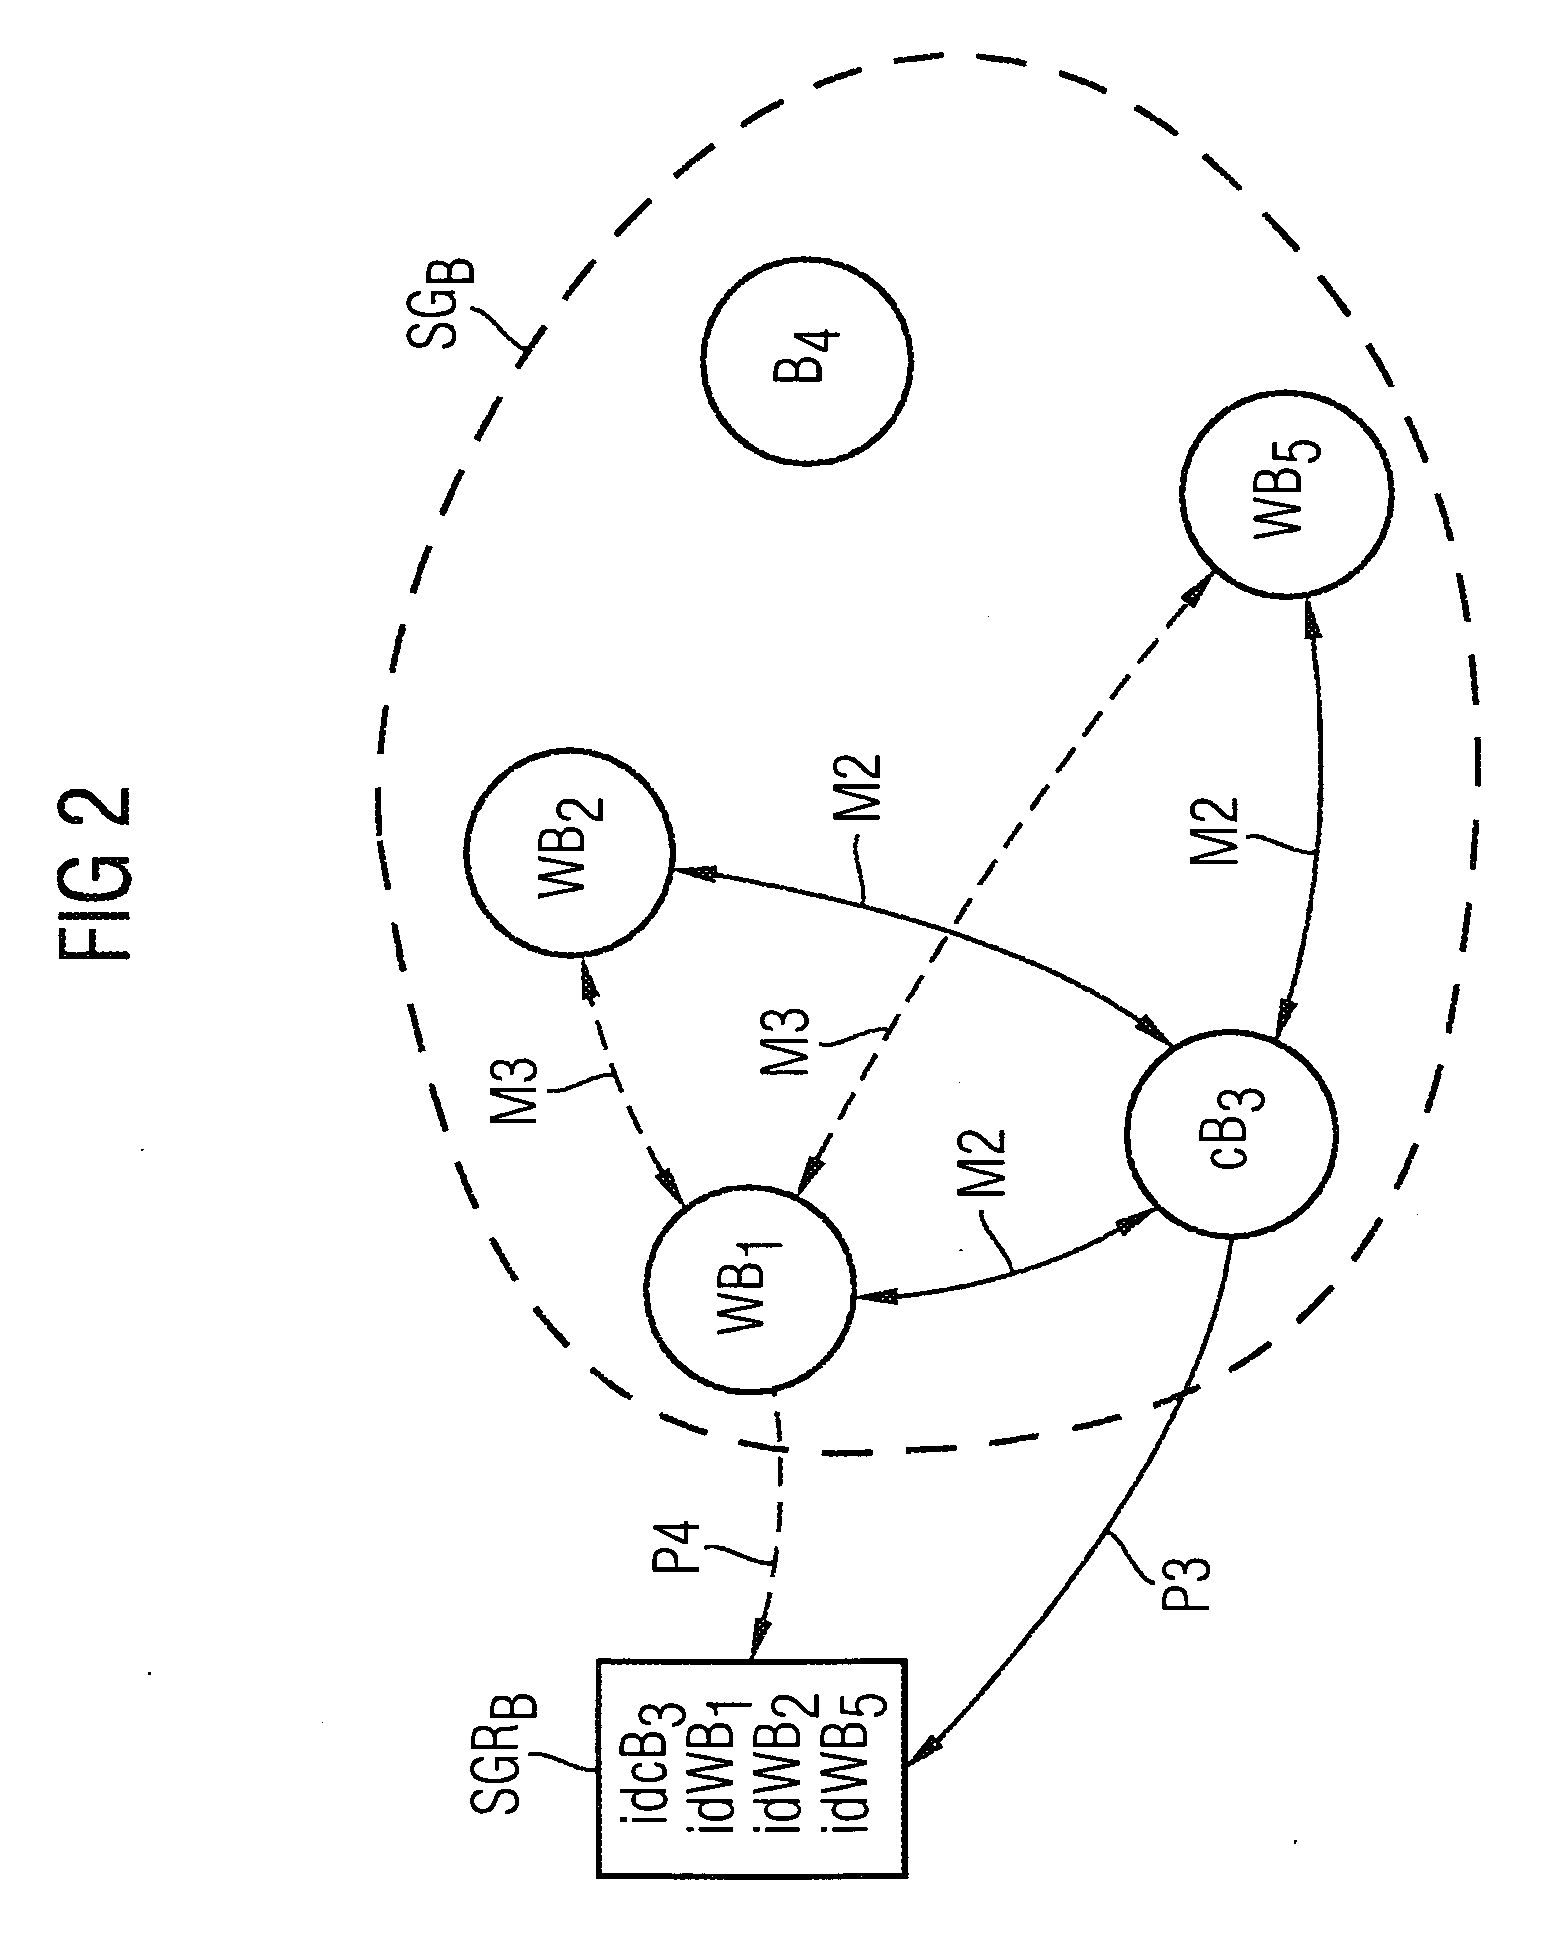 Method for Providing Composed Services in a Peer-To-Peer Network